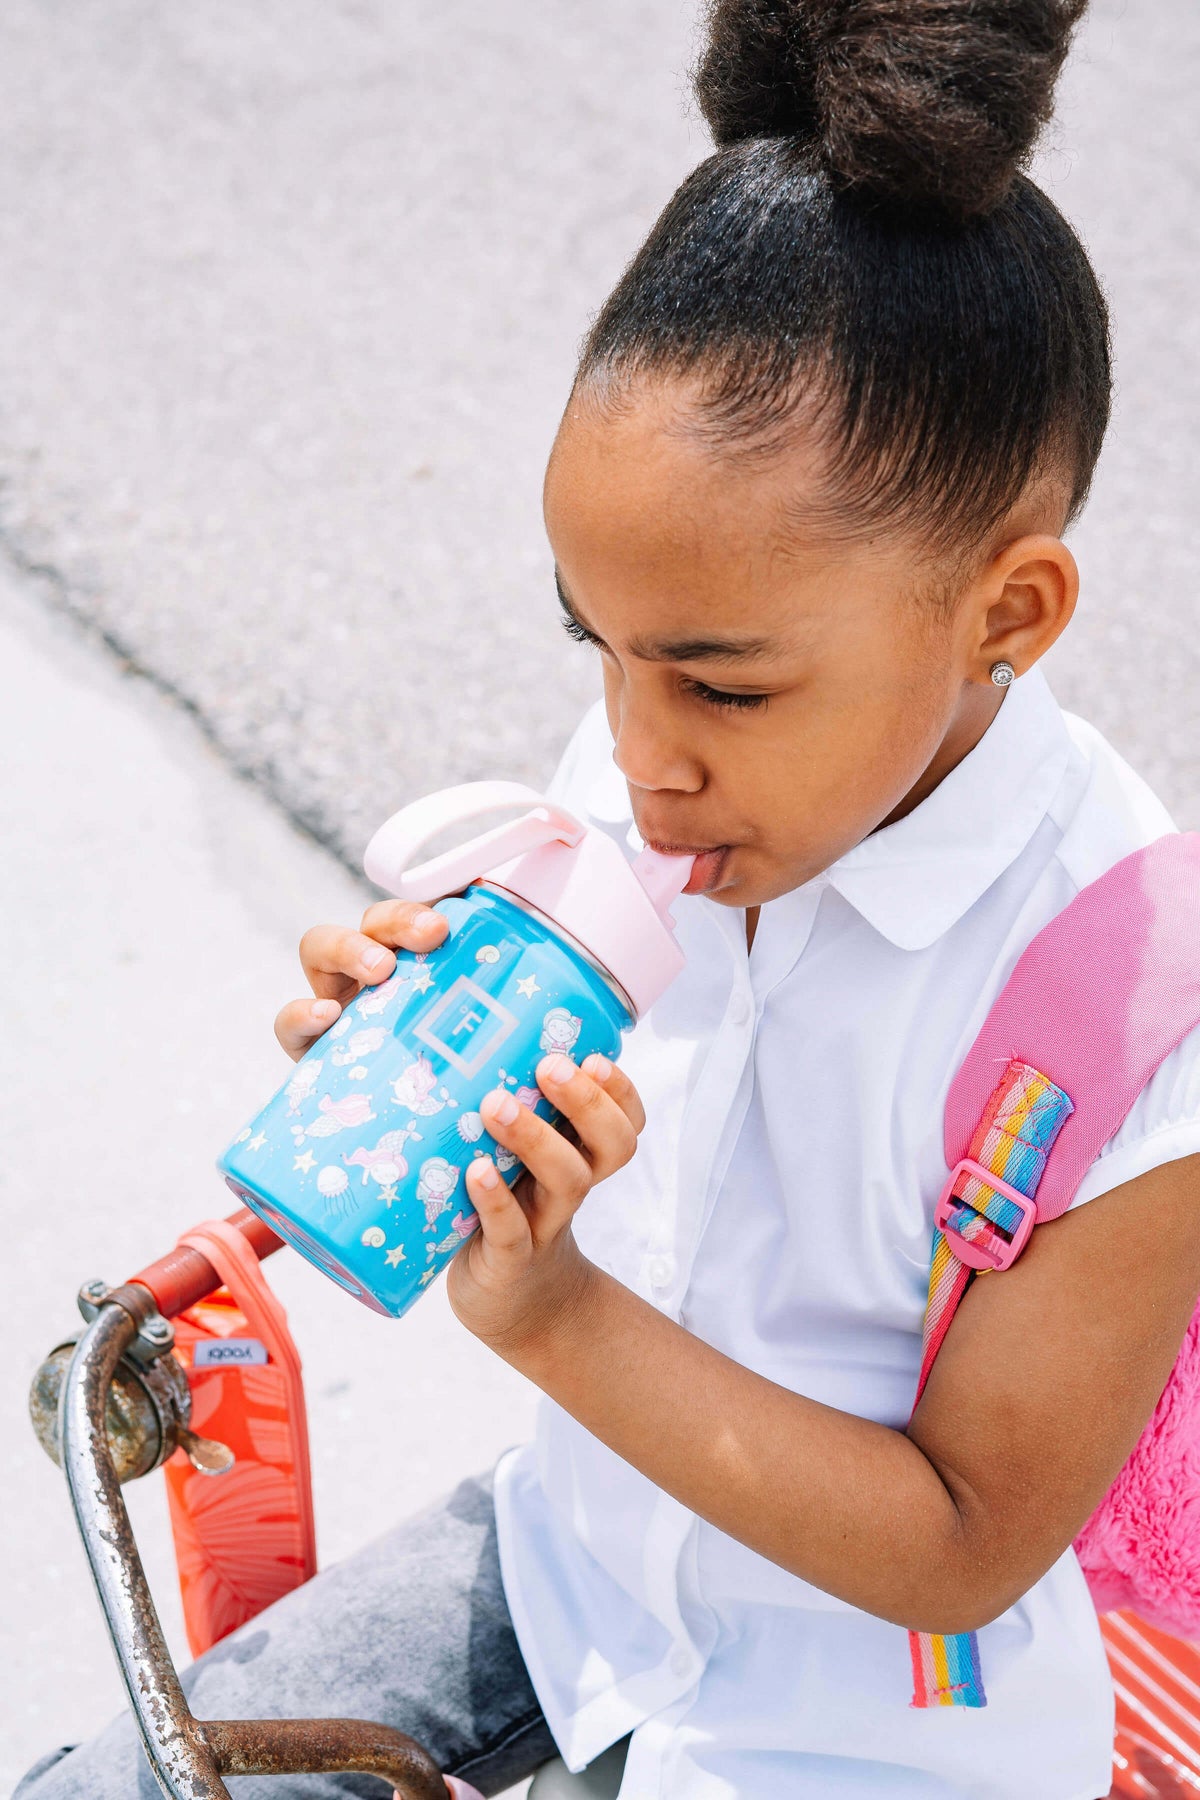 How to Spot the Signs of Dehydration in Kids